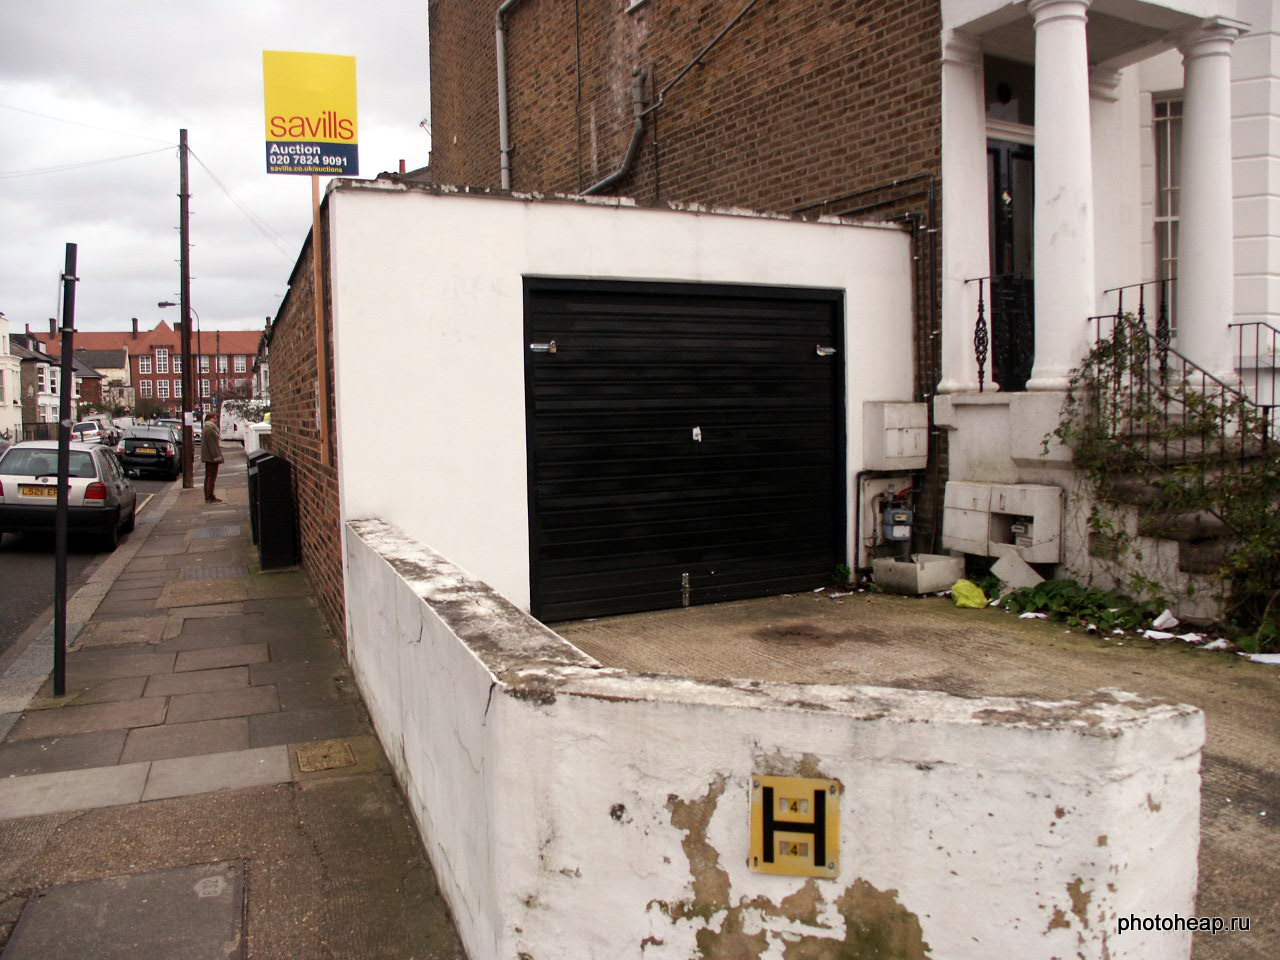 Garage with auction signpost